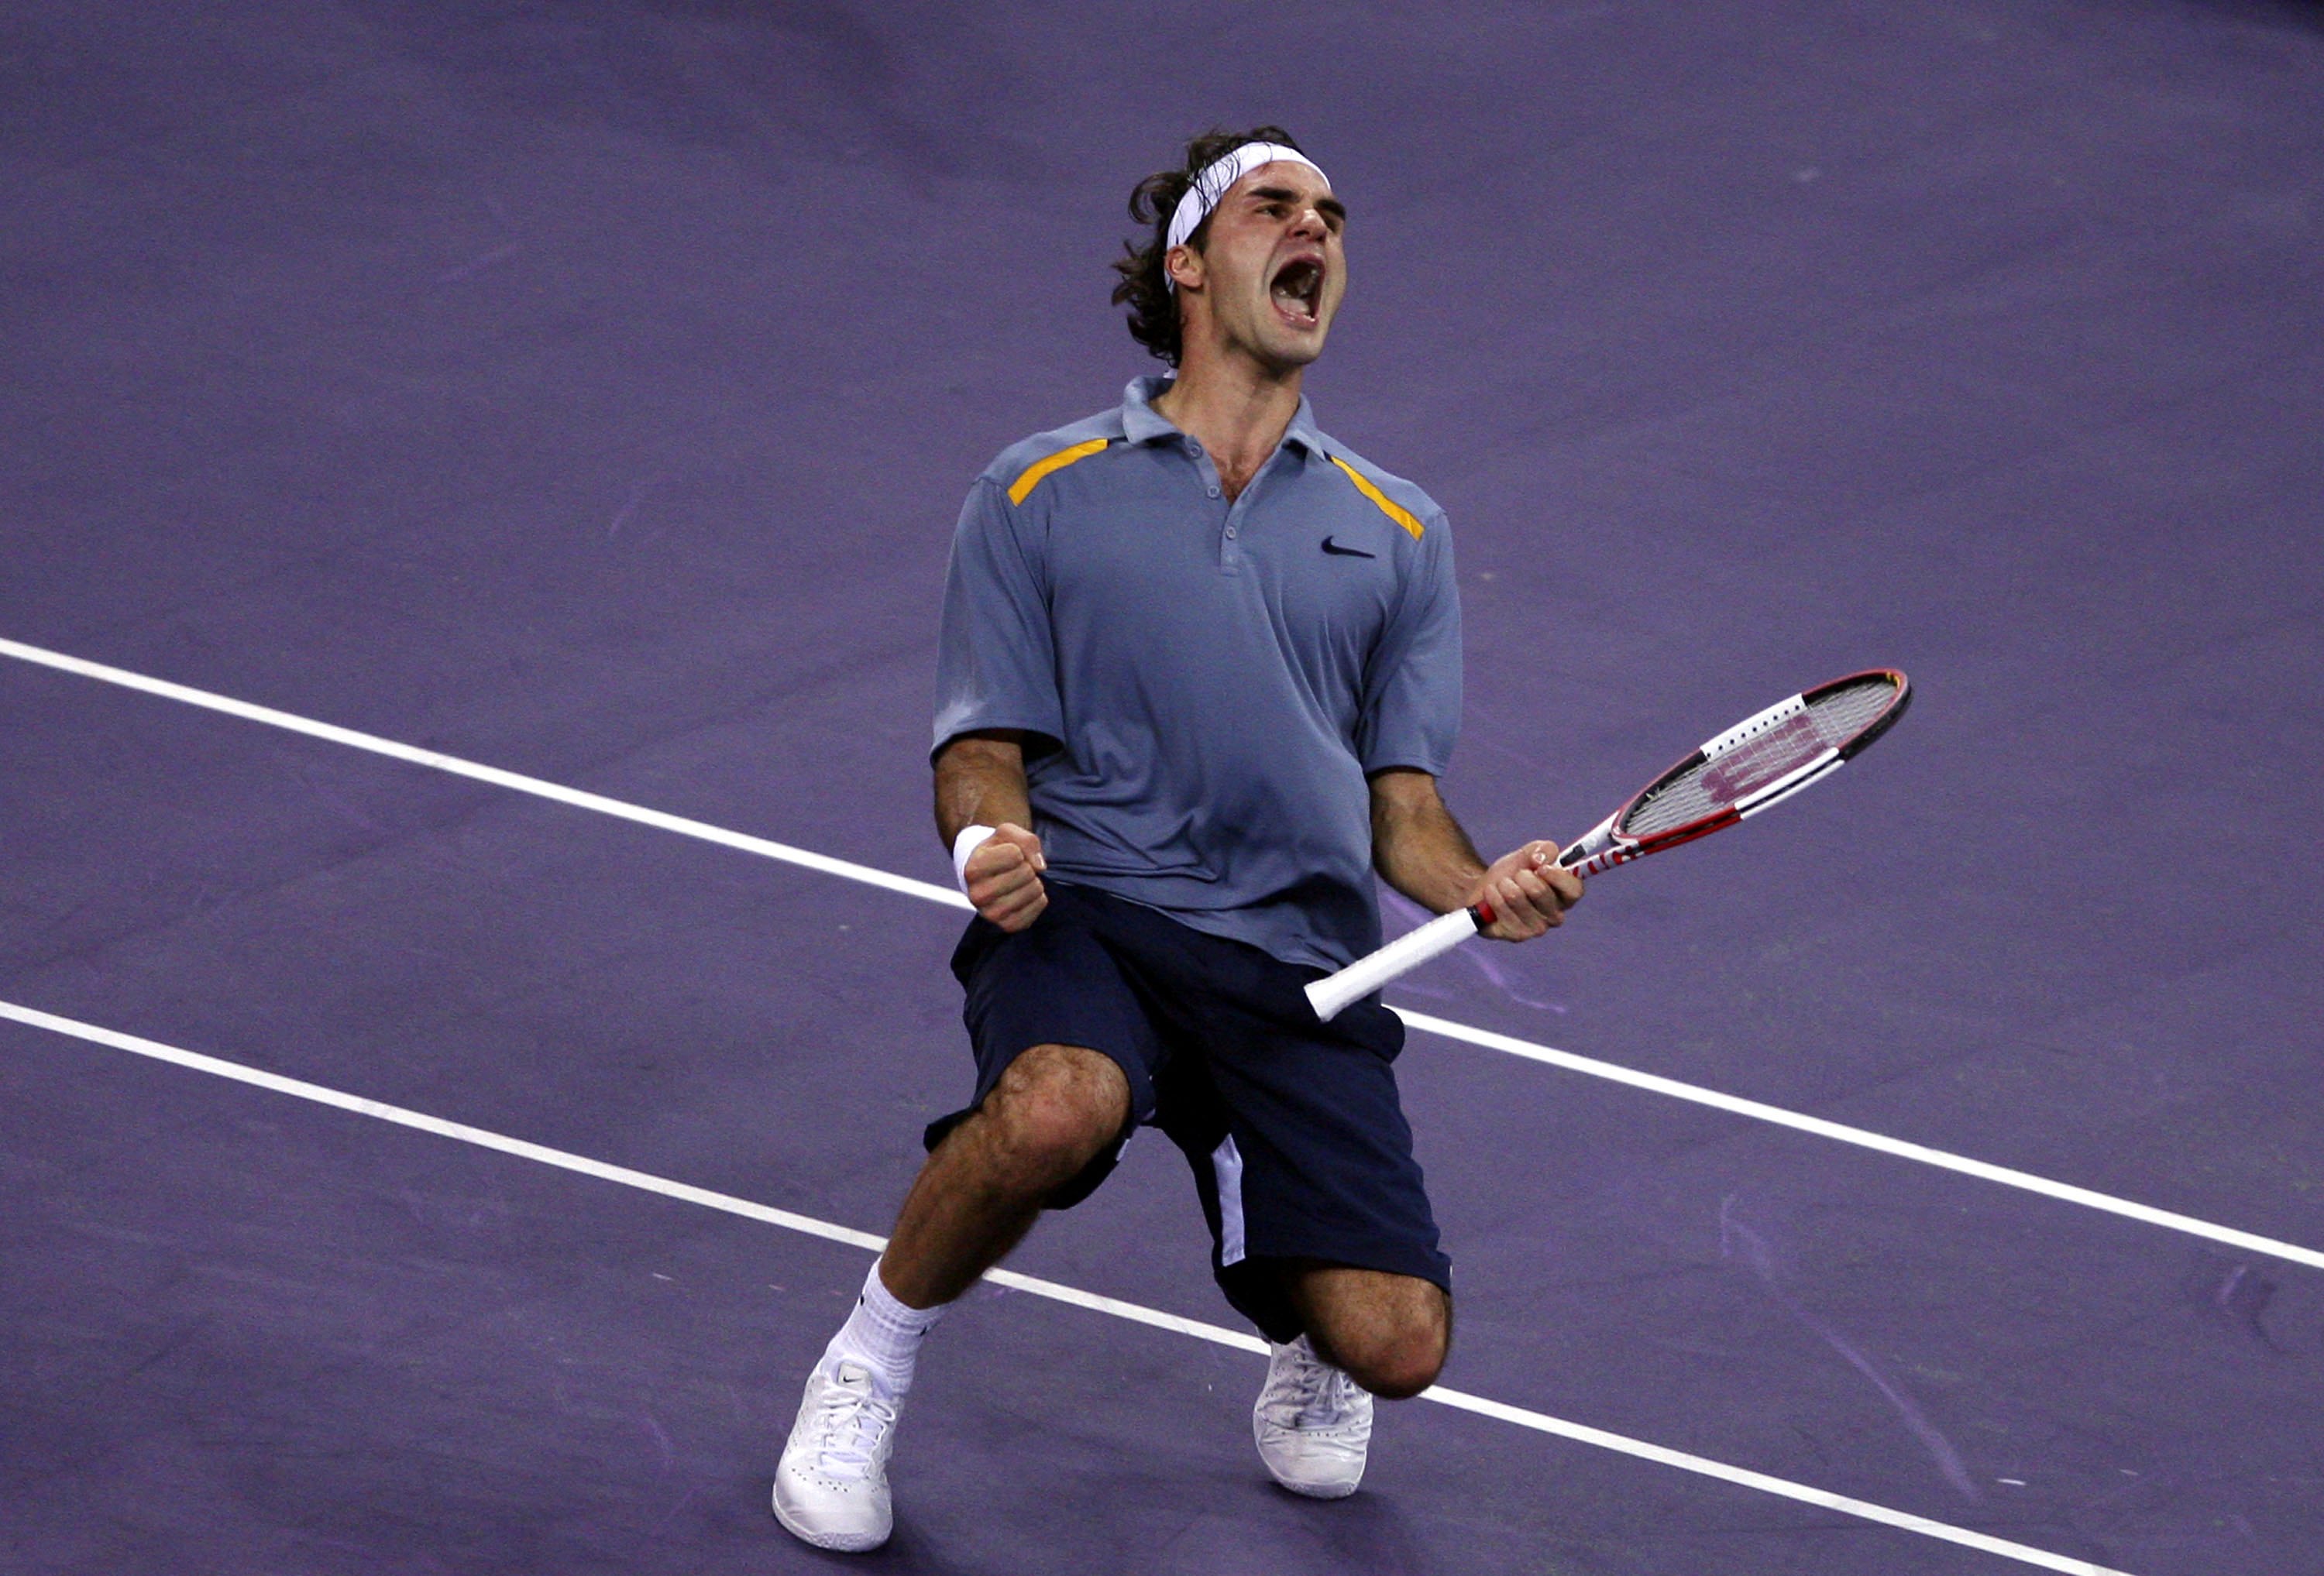 SHANGHAI, CHINA - NOVEMBER 18:  (CHINA OUT) Roger Federer of Switzerland reacts after defeating Rafael Nadal of Spain in the semi-finals of the Tennis Masters Cup Shanghai on November 18, 2006 at the Qi Zhong Tennis Stadium in Shanghai, China. (Photo by C